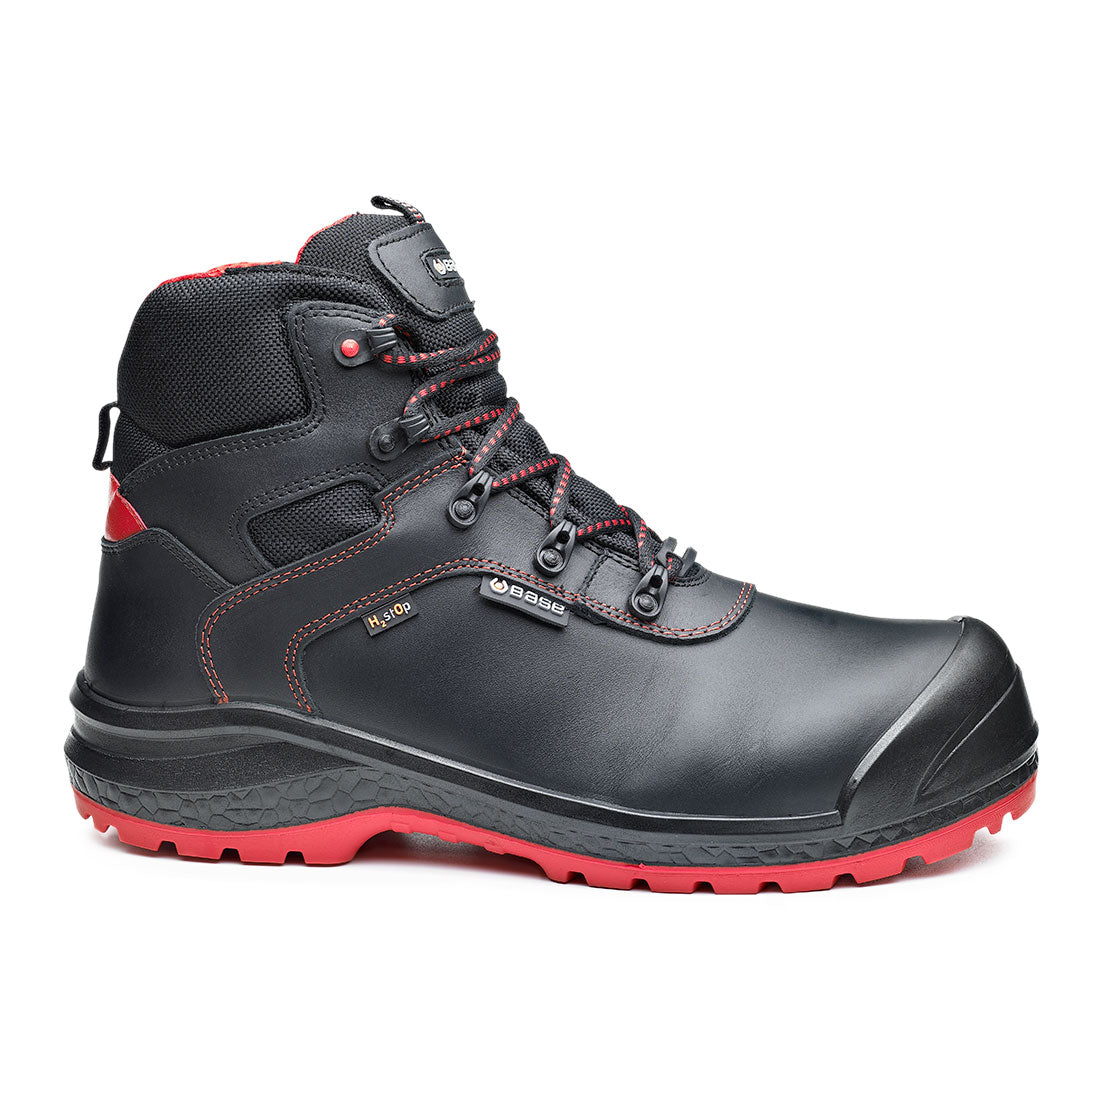 BASE B0895 Safety Boot Shoe Sz6 Black Be-Dry Mid/Be Rock